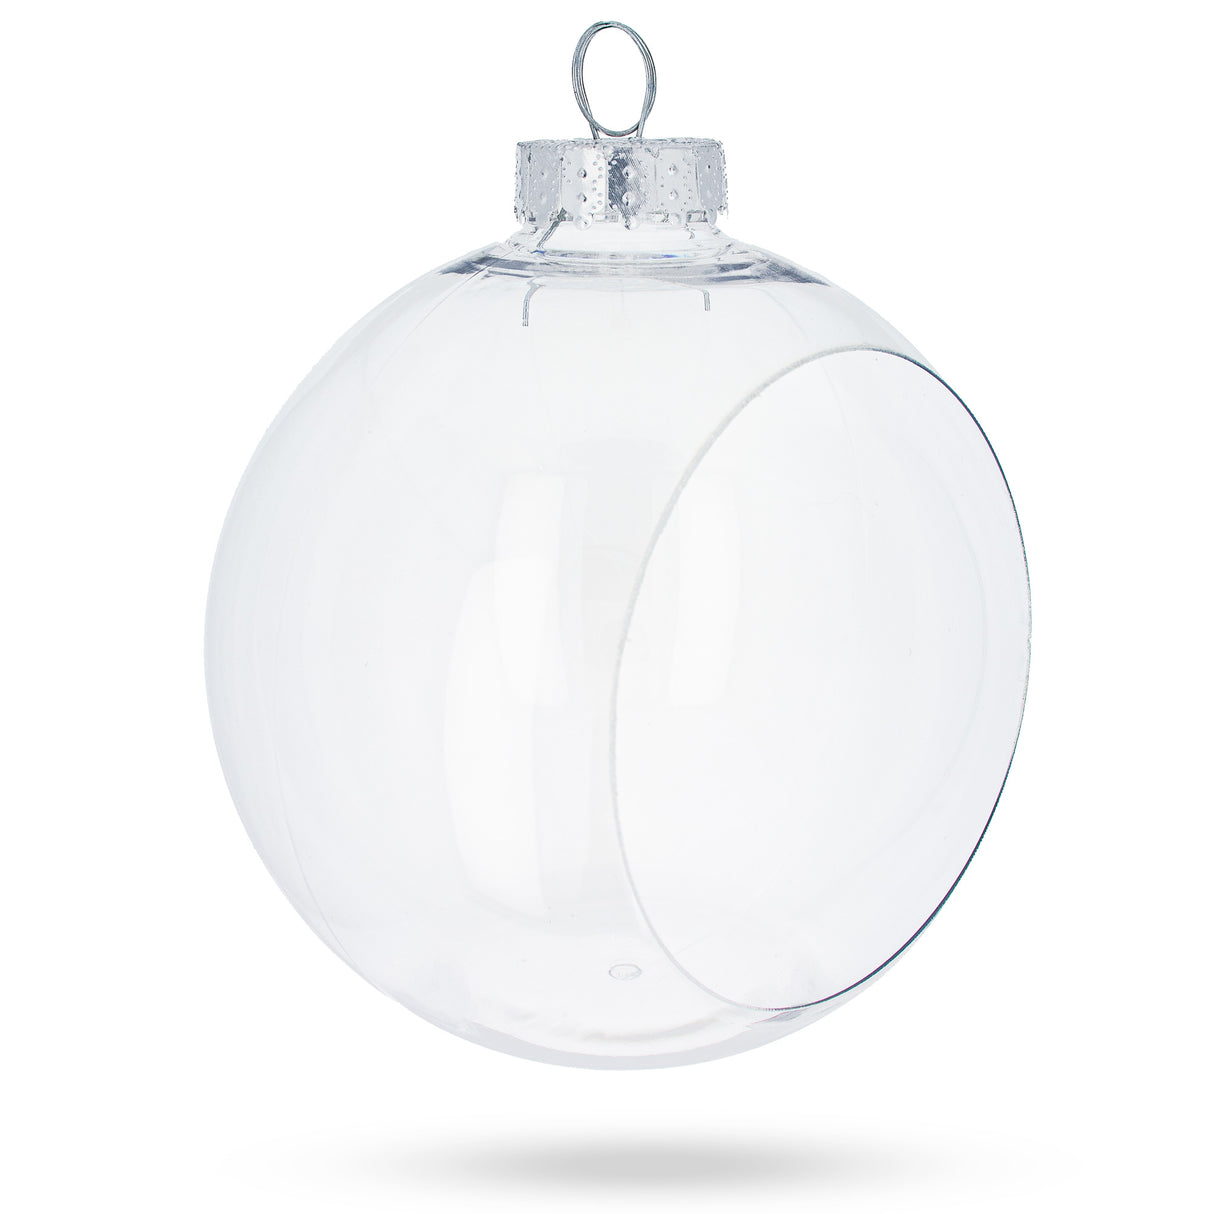 3.15-Inch Clear Plastic Fillable Christmas Ball Ornaments for DIY